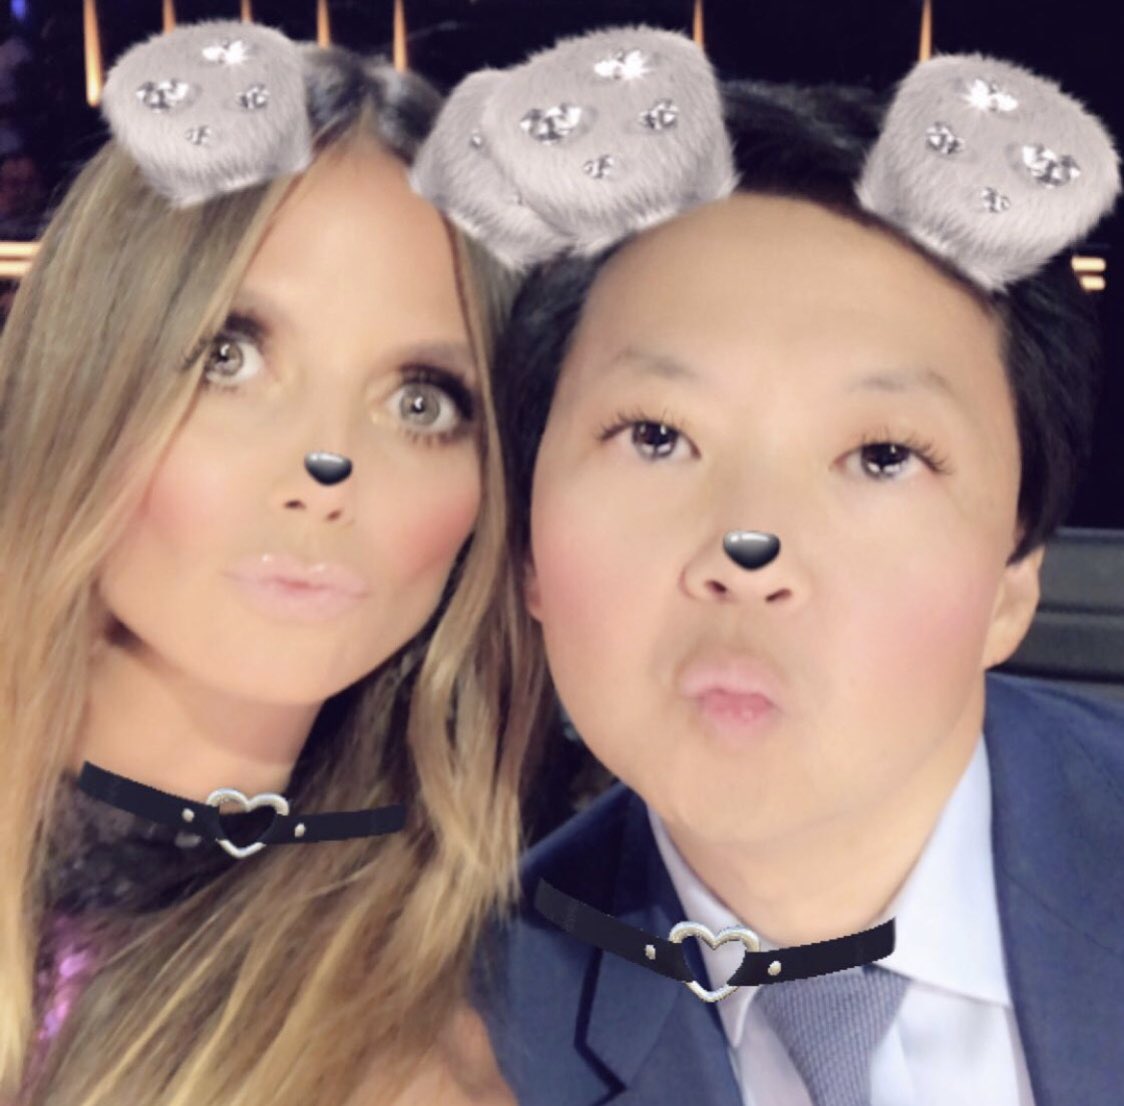 So excited to have @kenjeong on @AGT #JudgeCuts tomorrow night! https://t.co/uxOPGTJV11